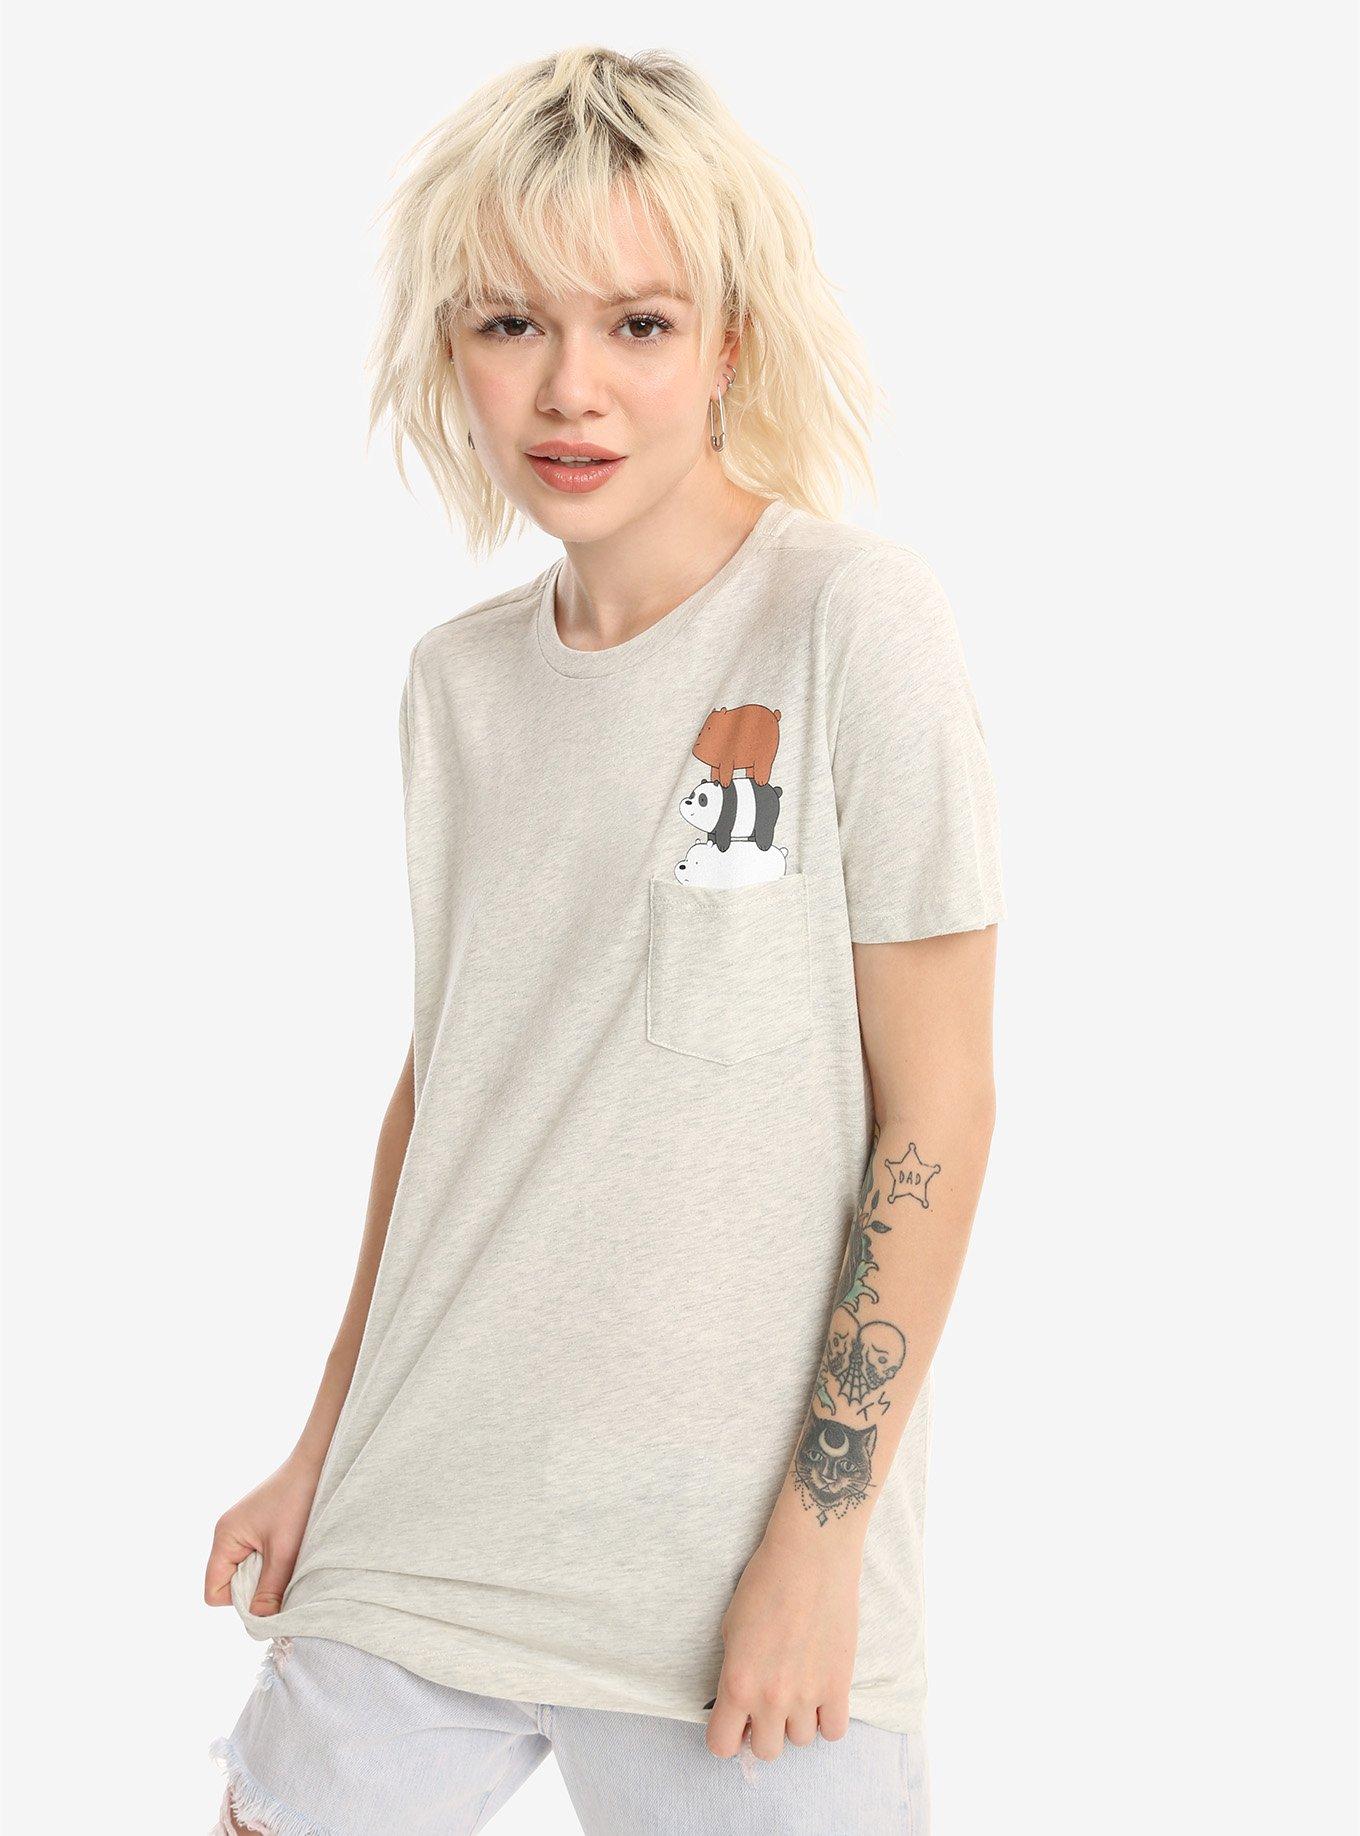 We Bare Bears Pocket Stacked Girls T-Shirt, OATMEAL HEATHER, hi-res